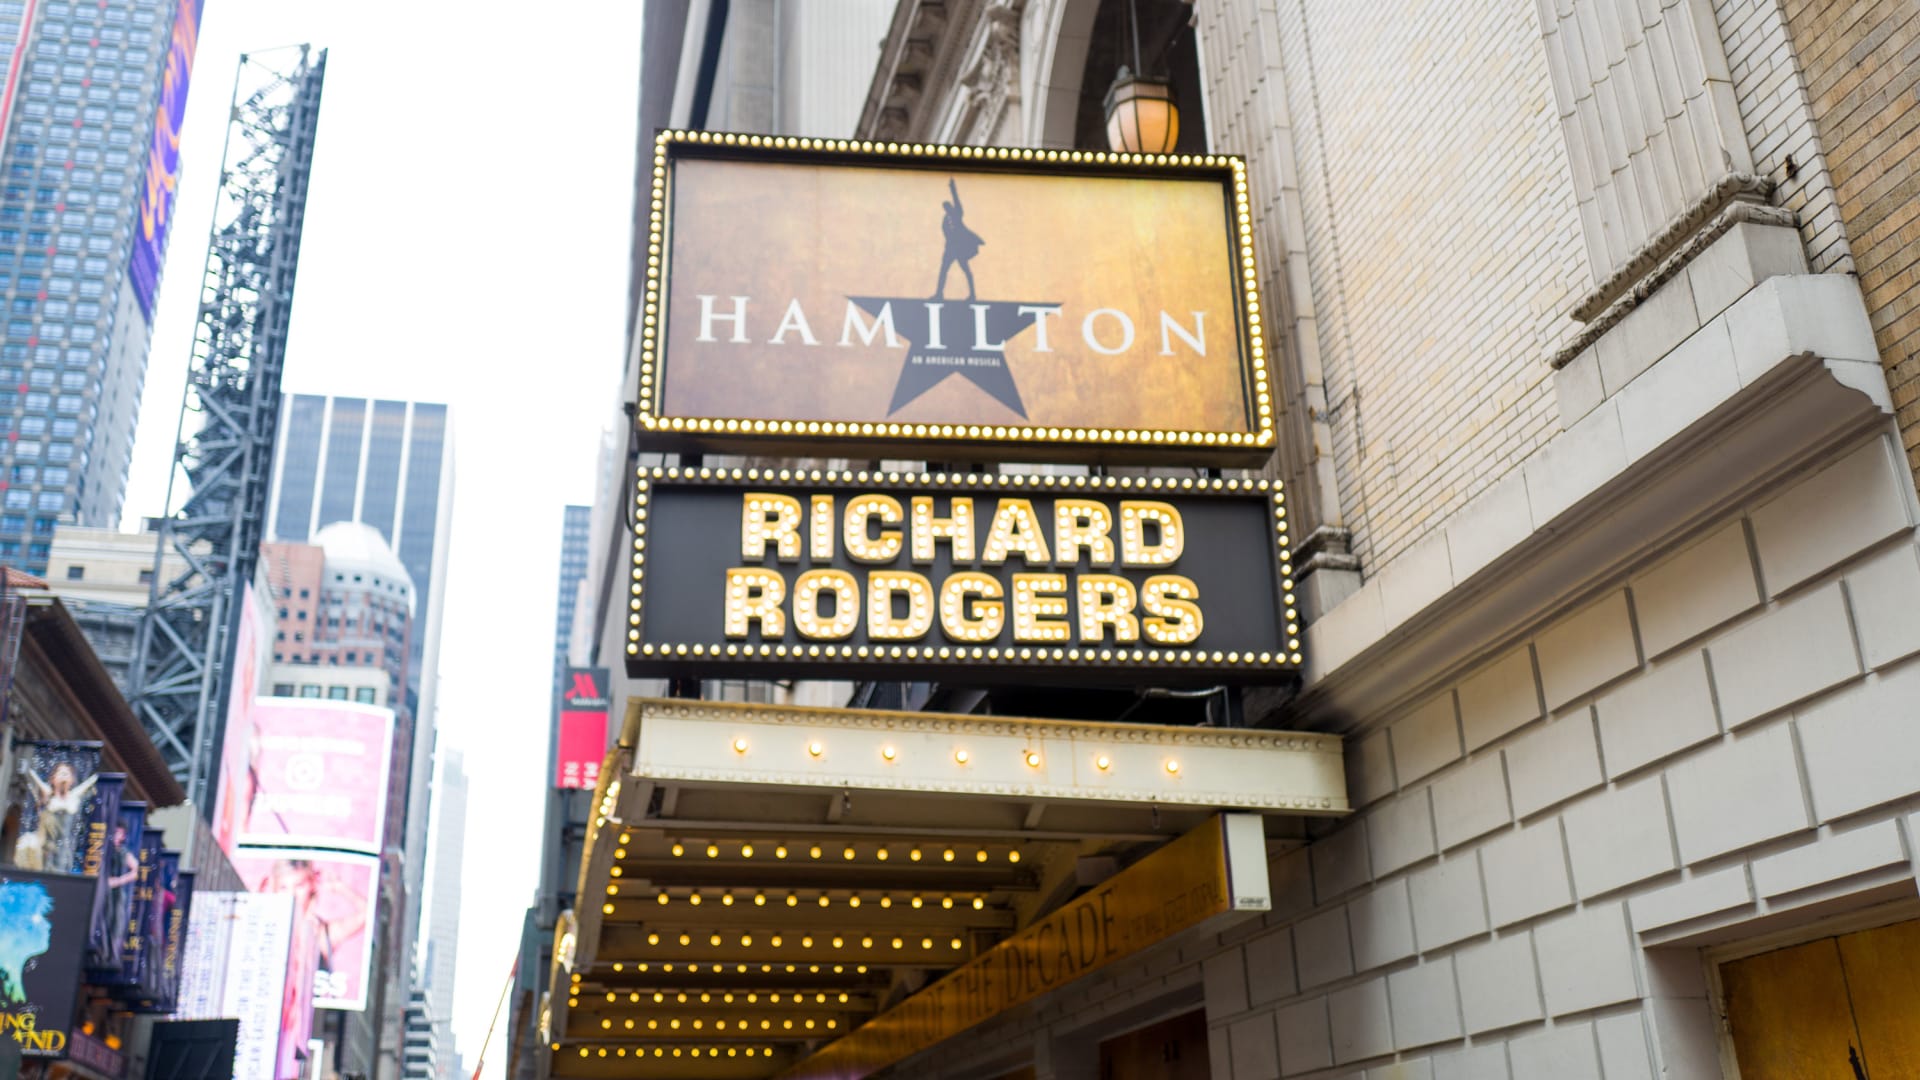 A marquee for the musical 'Hamilton' at the Richard Rodgers theater.